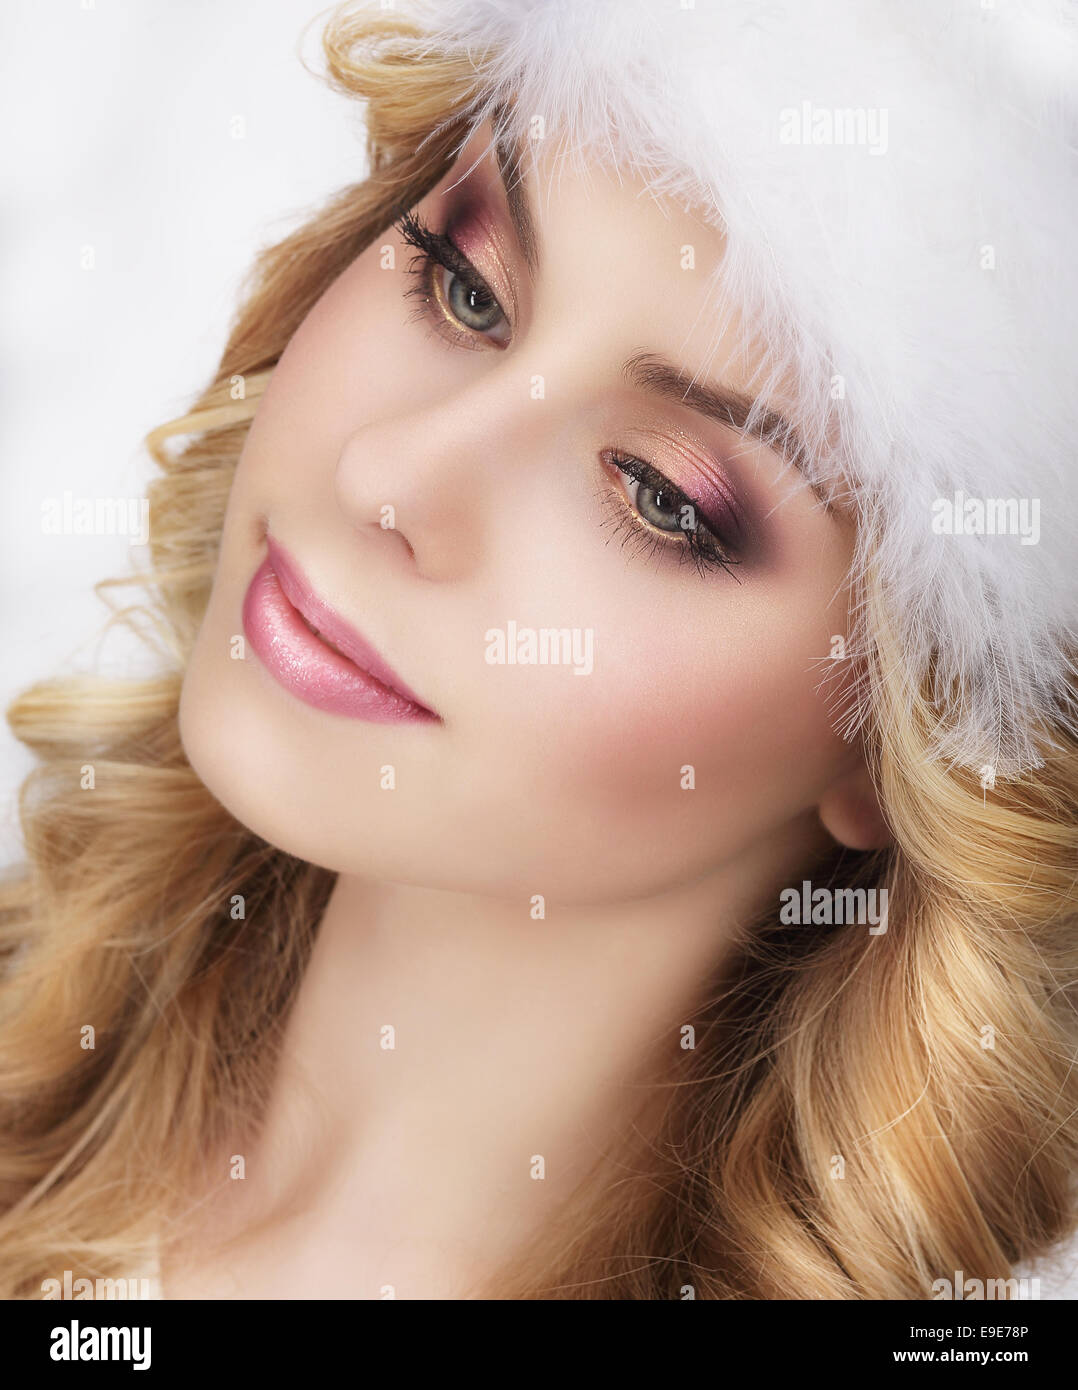 Pretty Dreamy Young Woman's Face Stock Photo